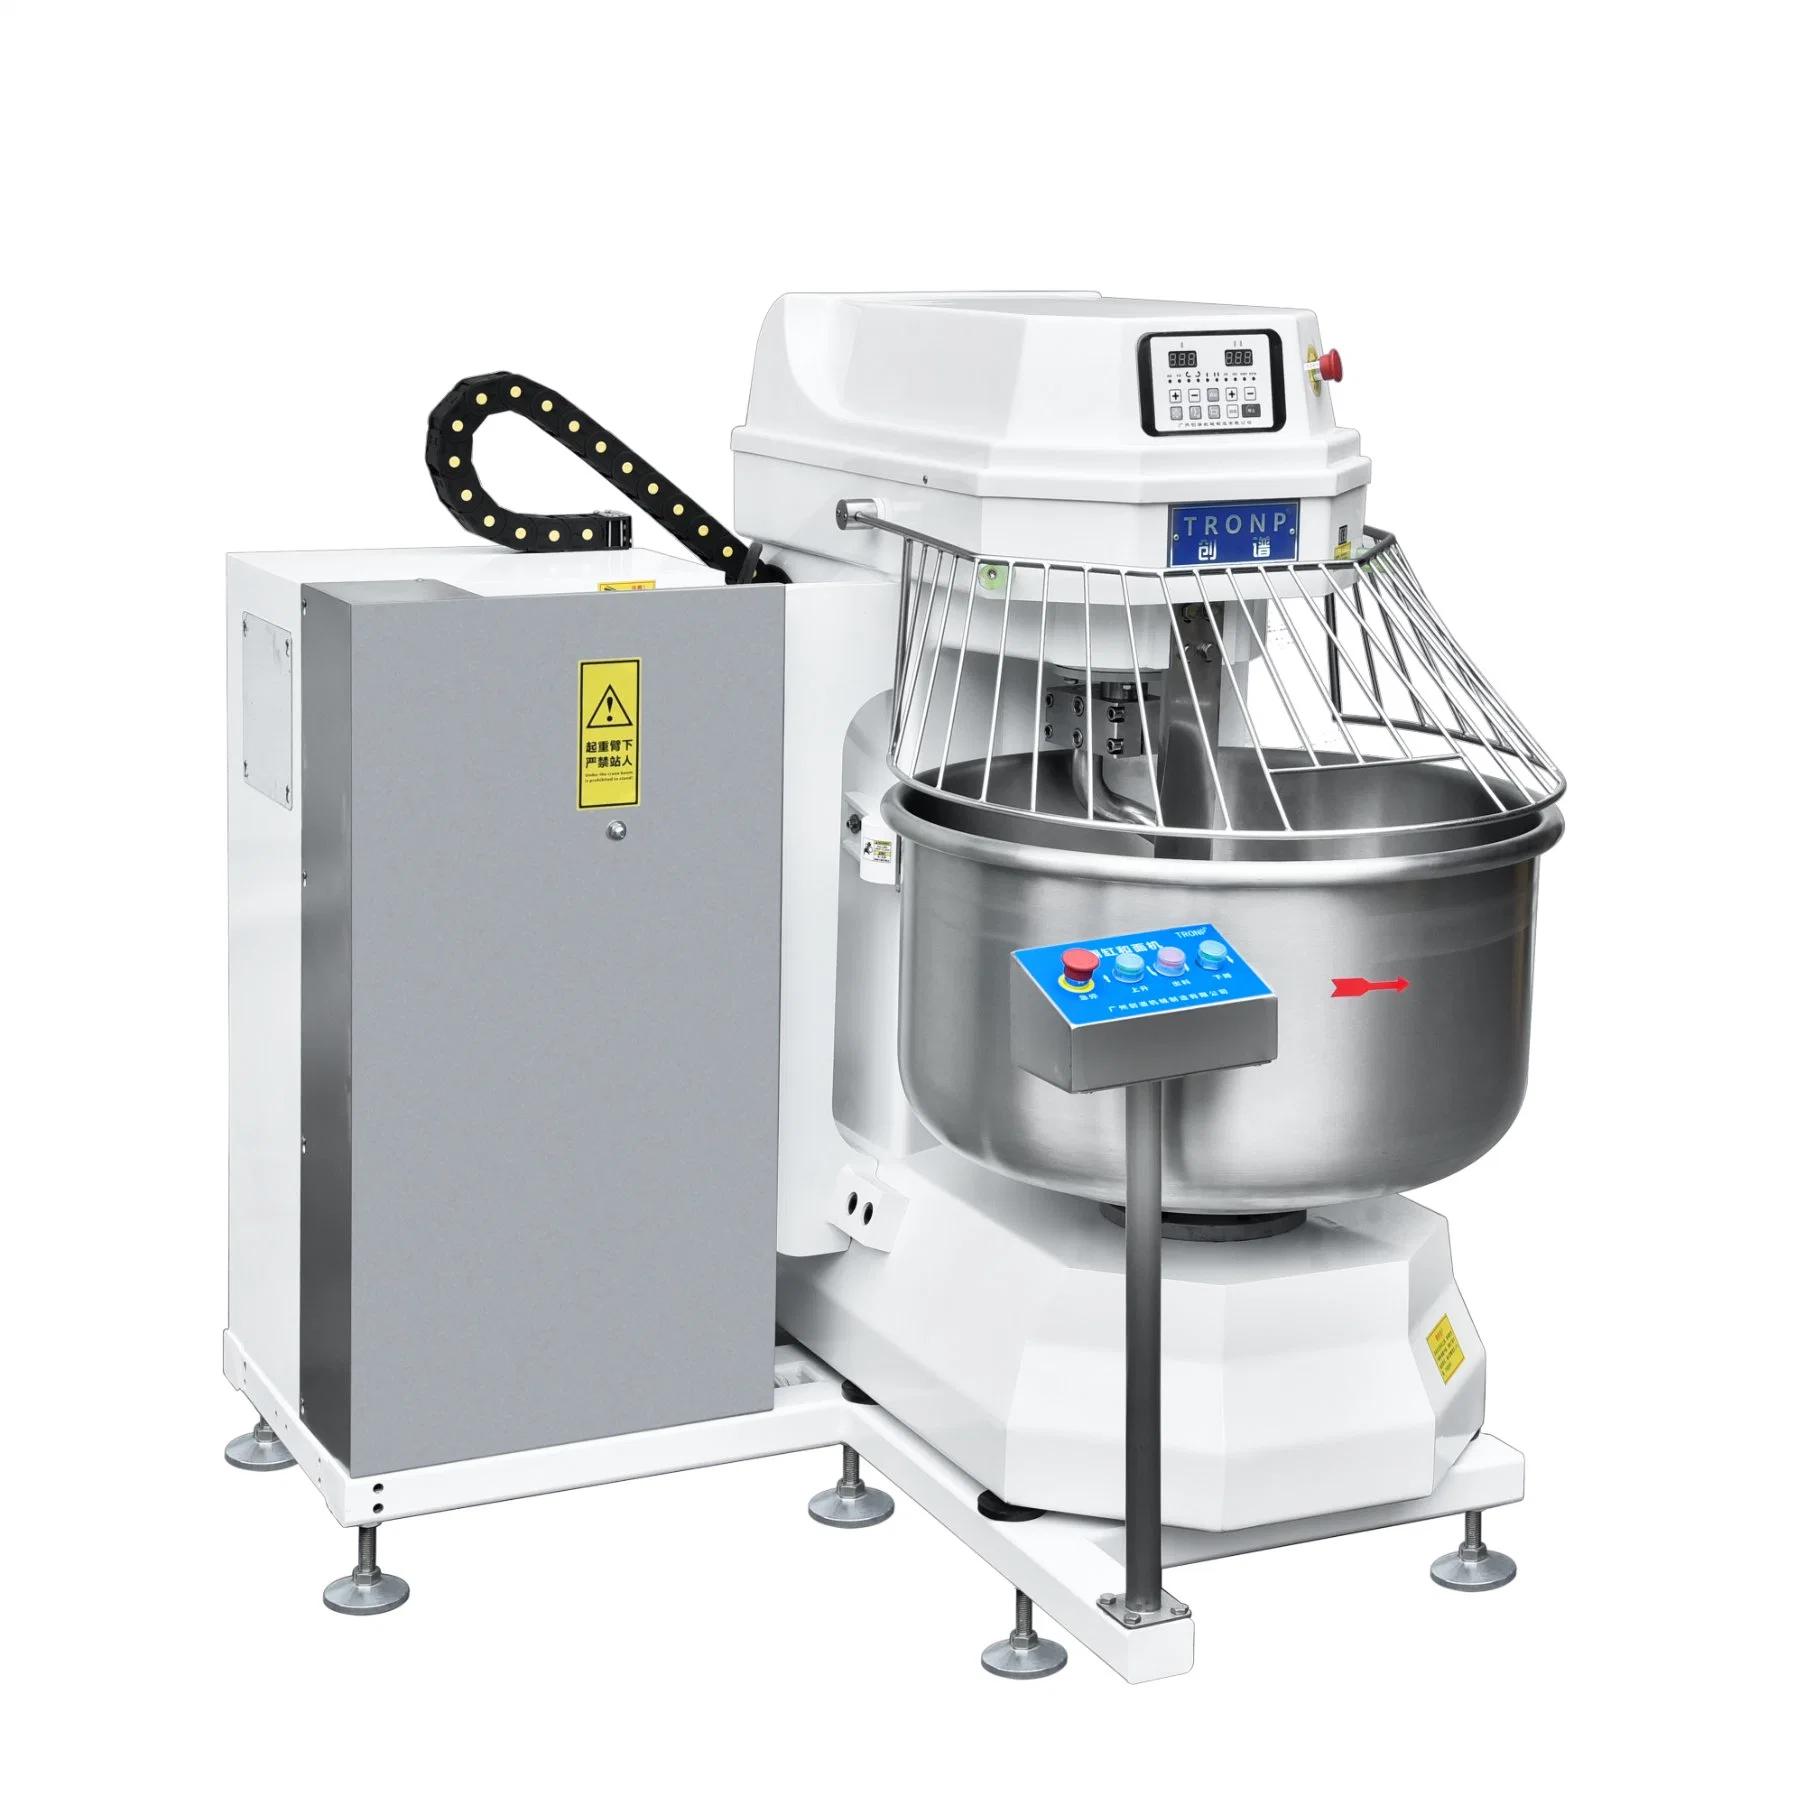 High-Quality Commercial Dough Mixer Machine for Bakery Tp-220f-a/B (5 bags)